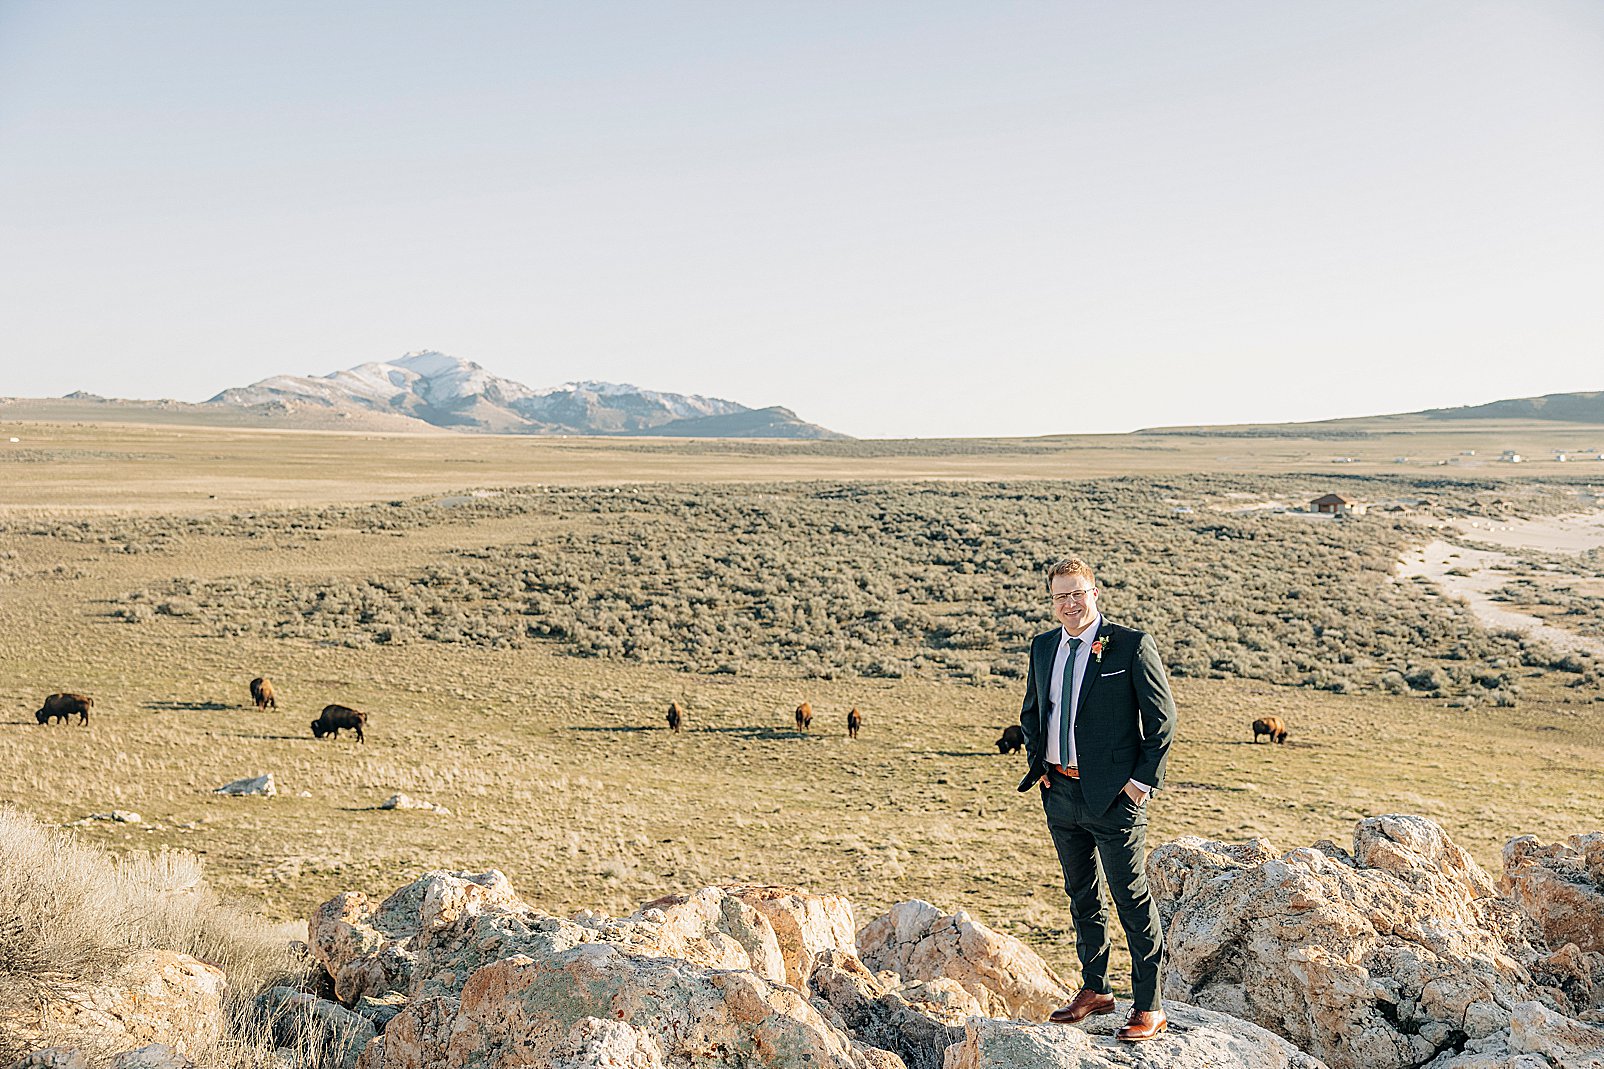 Guy In Suit With Buffalo At Antelope Island